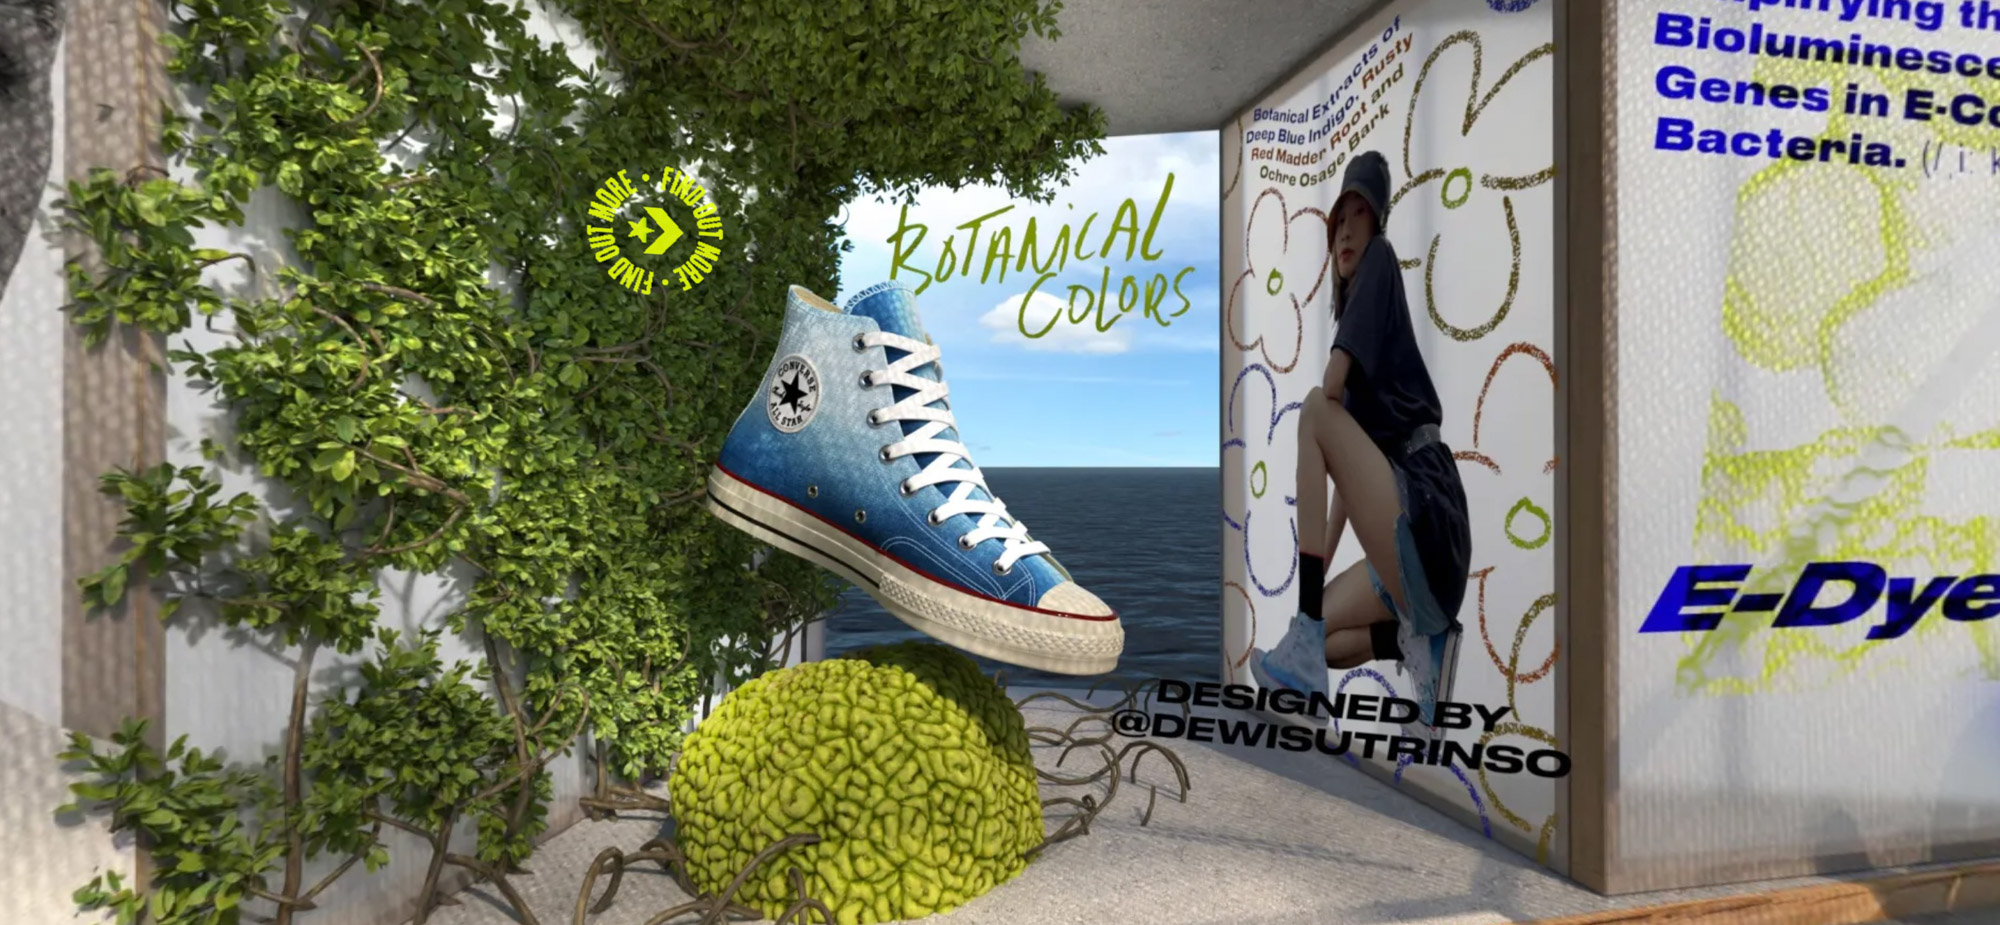 Converse Opens a Virtual Shoe Store on the Island of Garbage